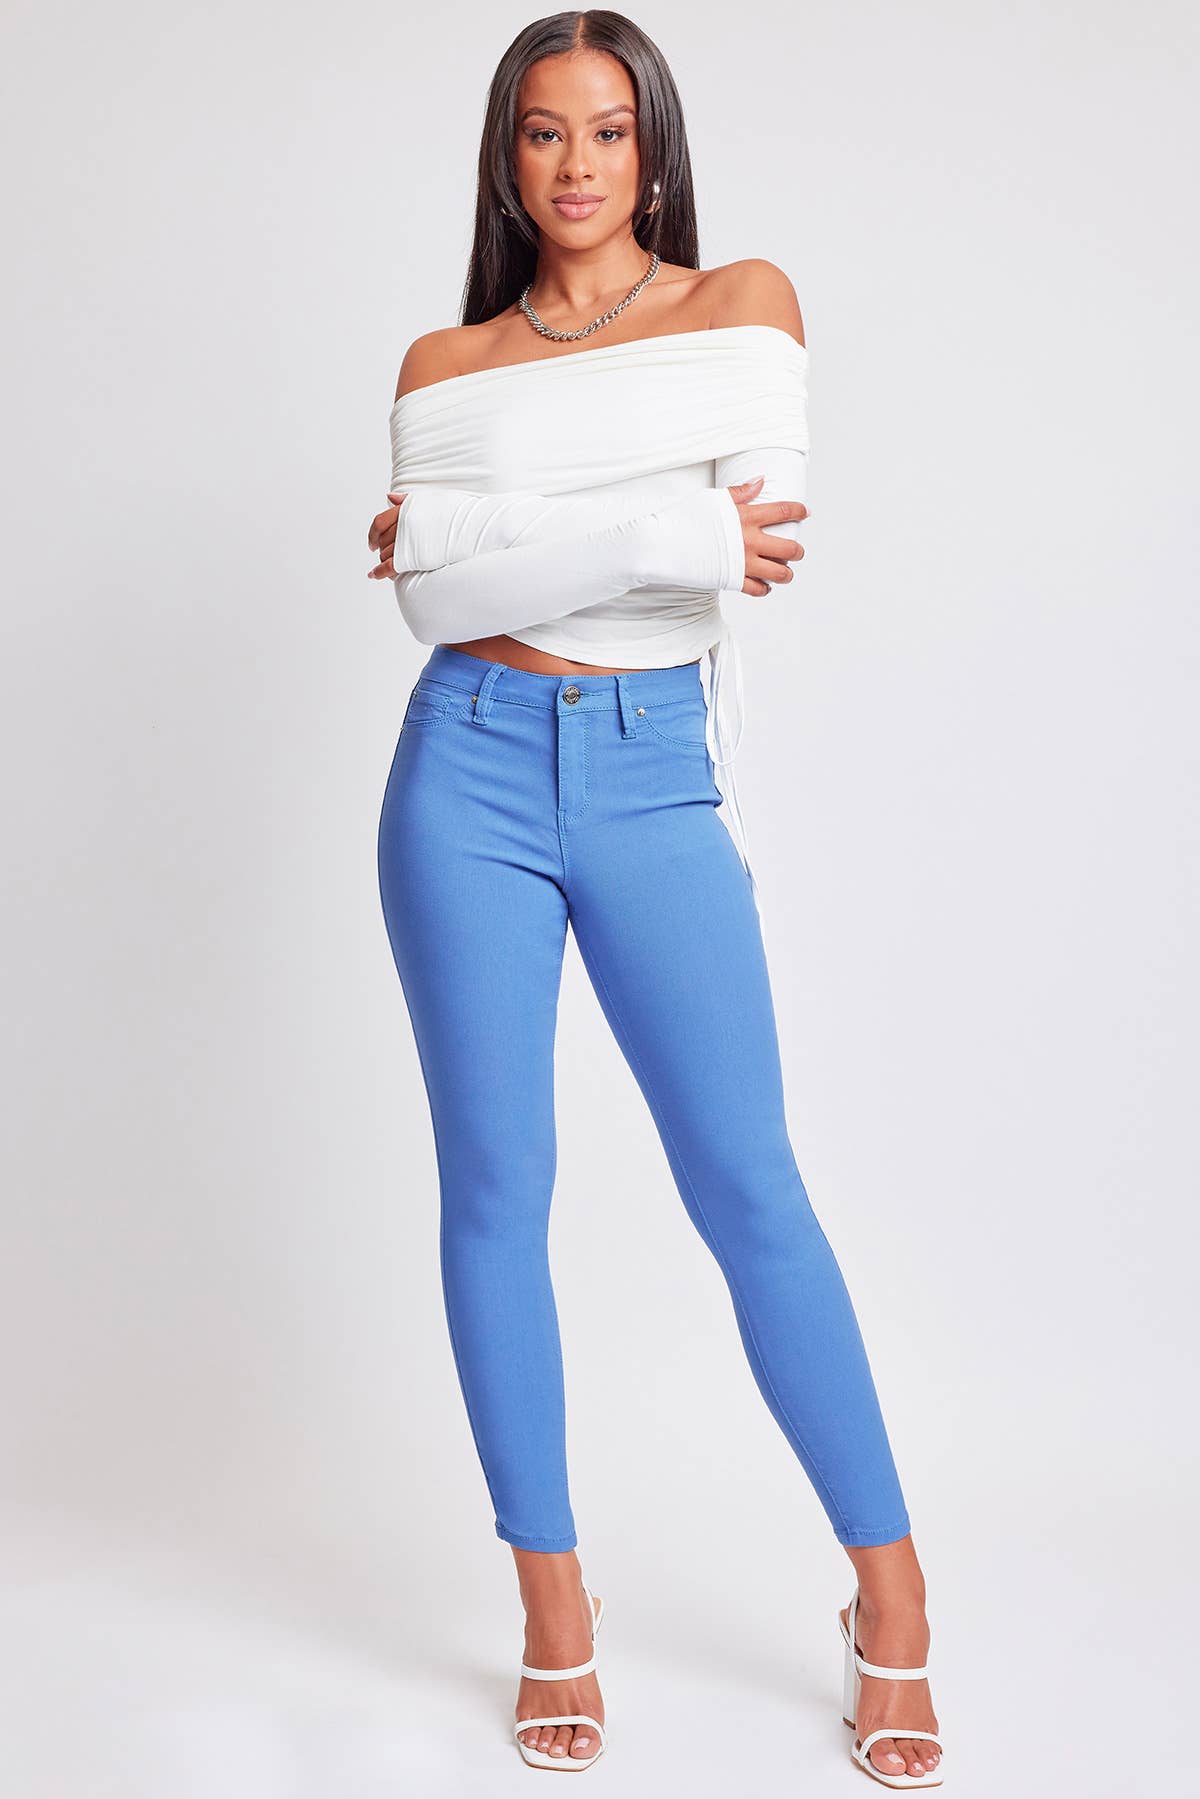 Hyperstretch Mid-Rise Skinny Jean: M / Junior / Shell Pink